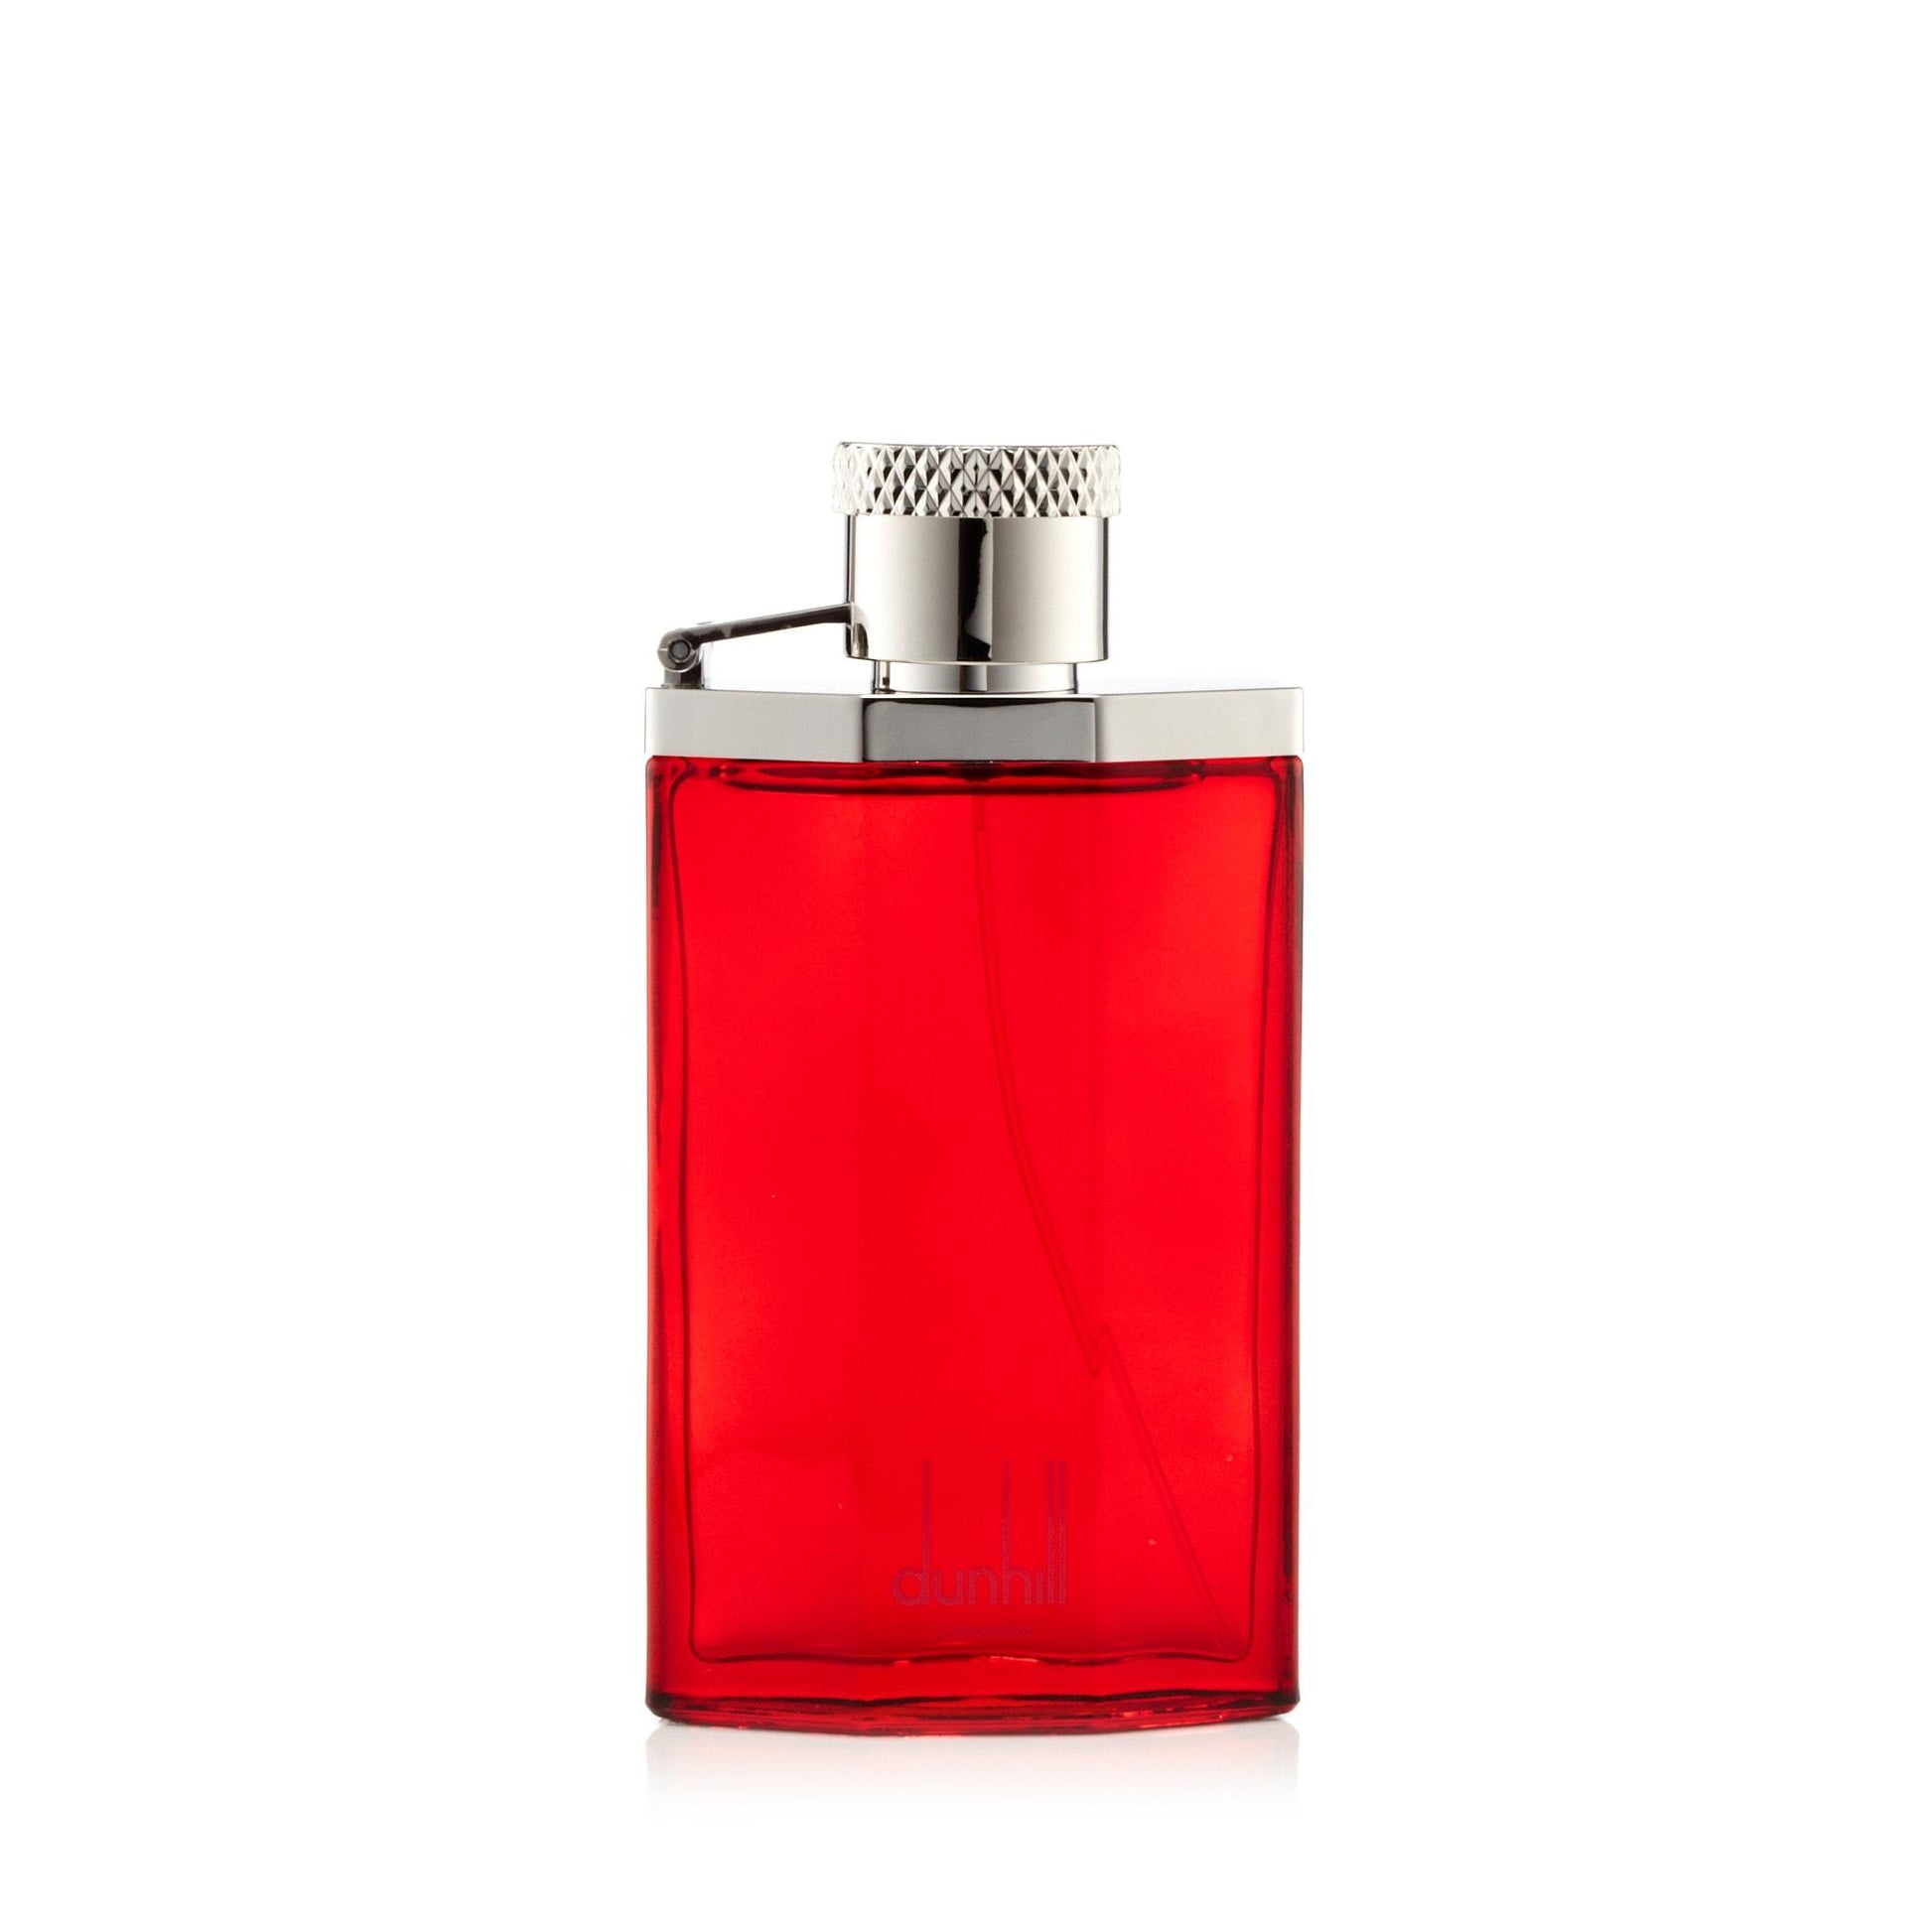 Desire Red Eau de Toilette Spray for Men by Alfred Dunhill, Product image 2